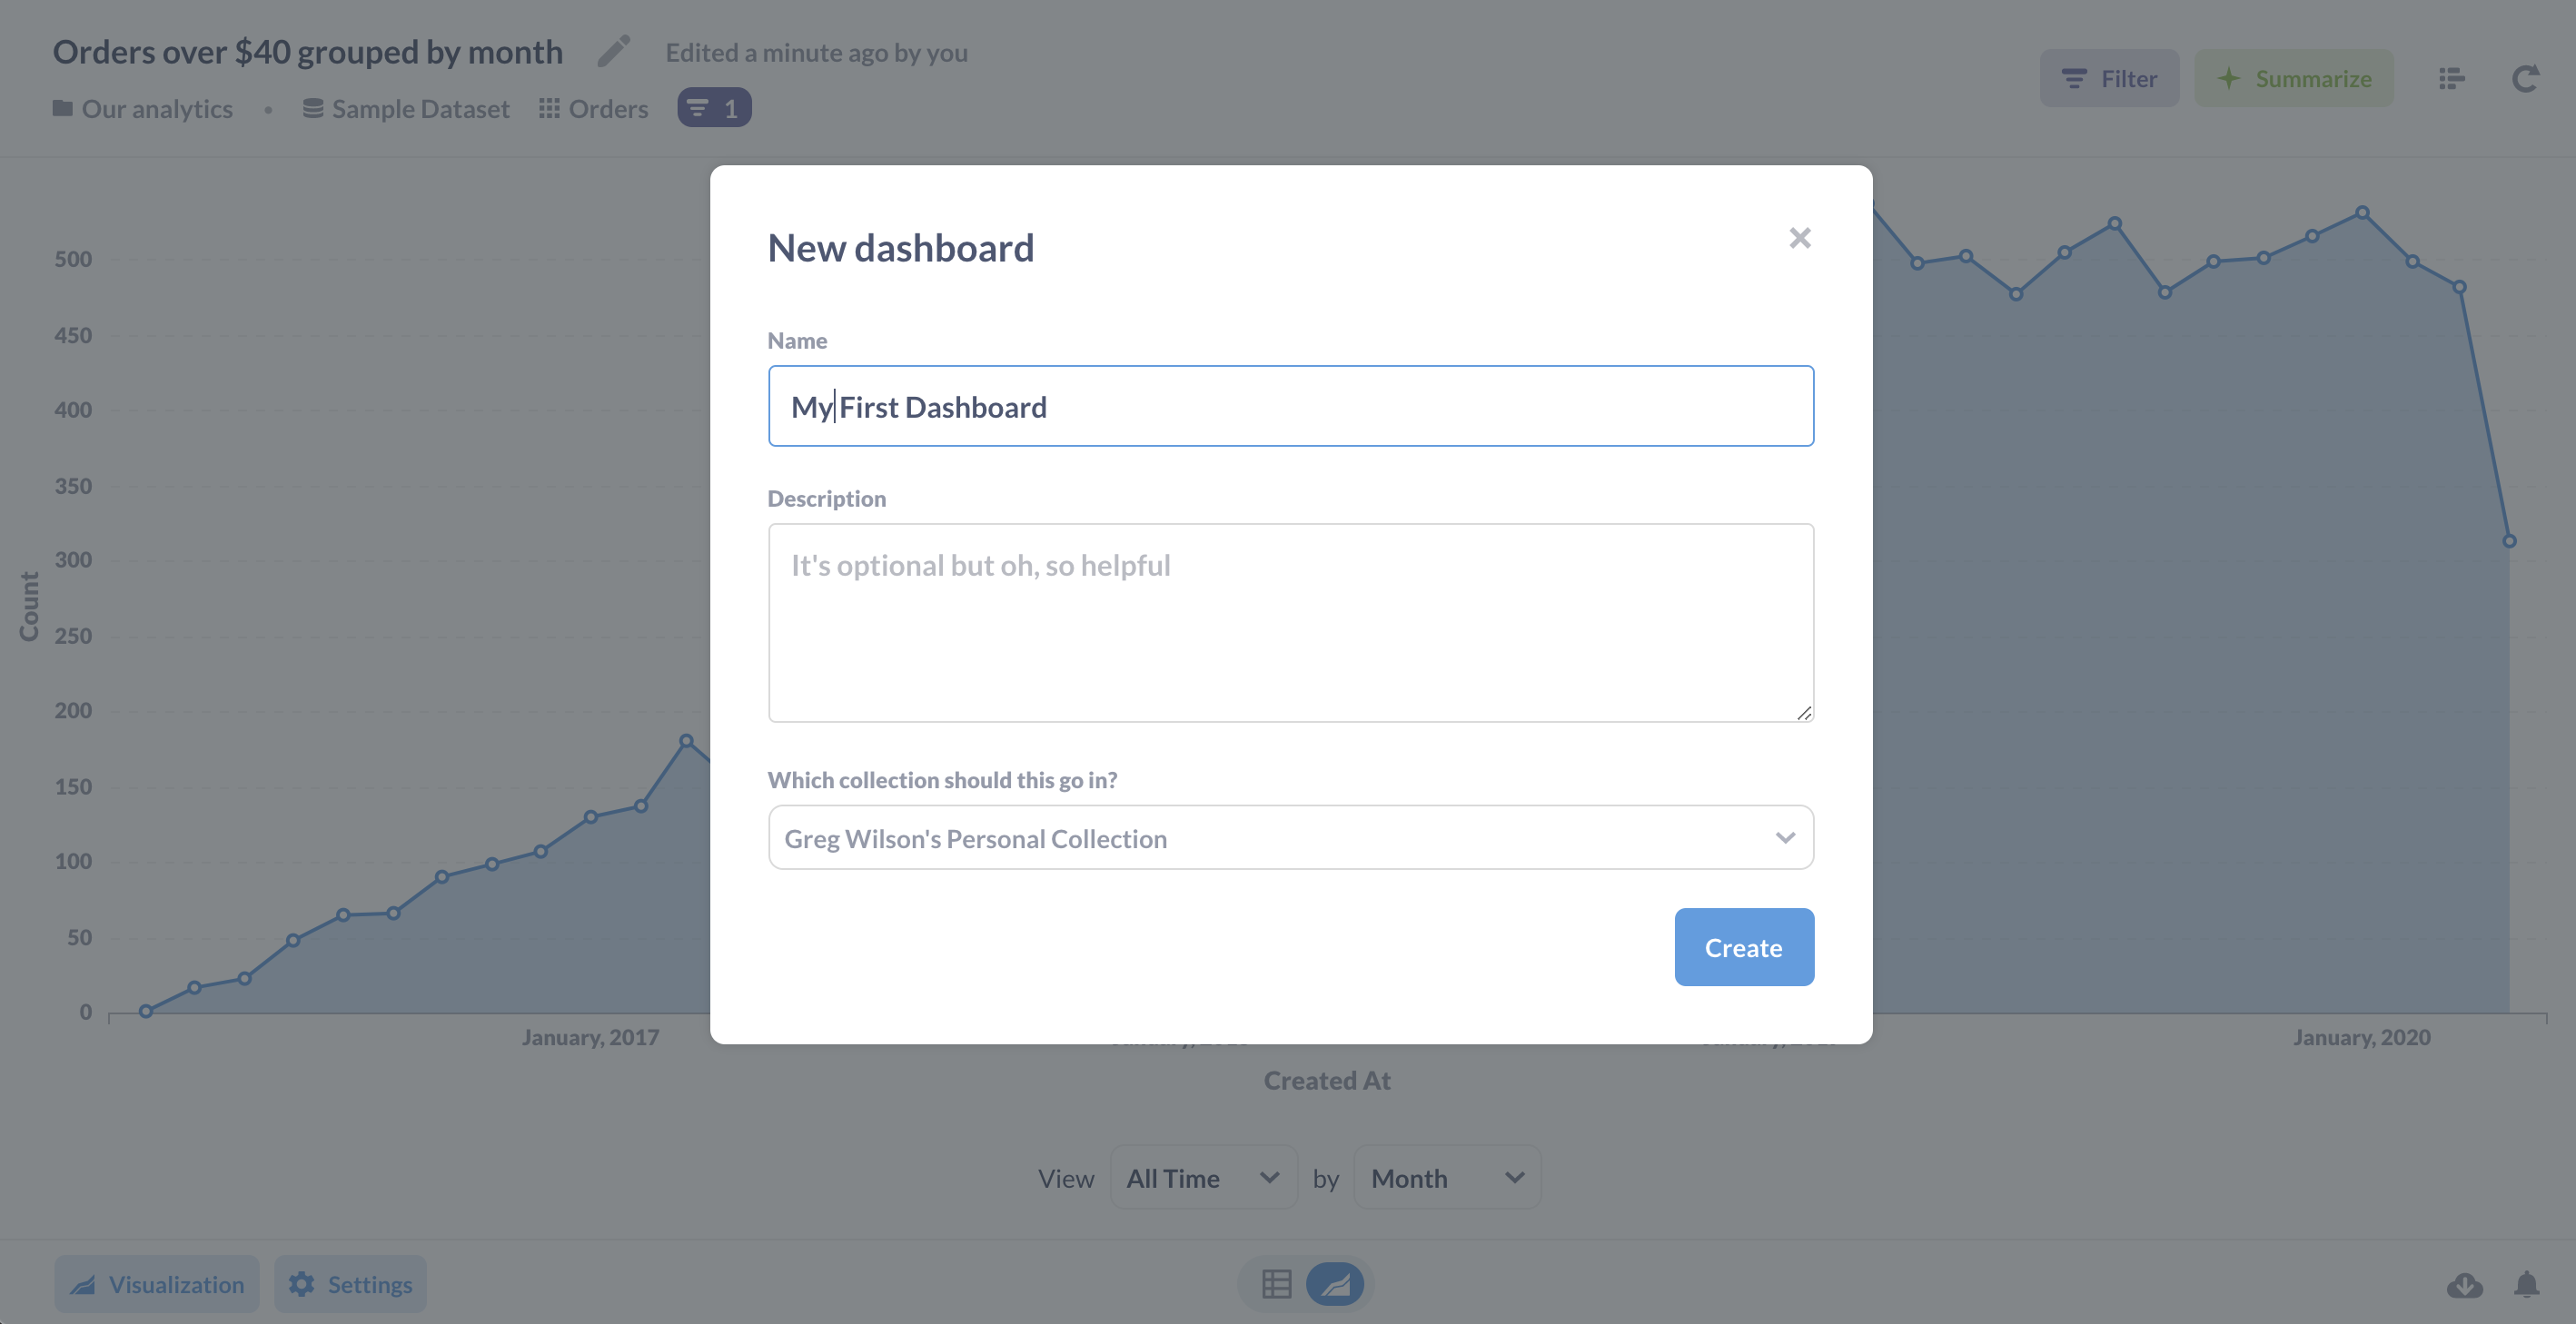 When you save a question, you can create a new dashboard to add it to.